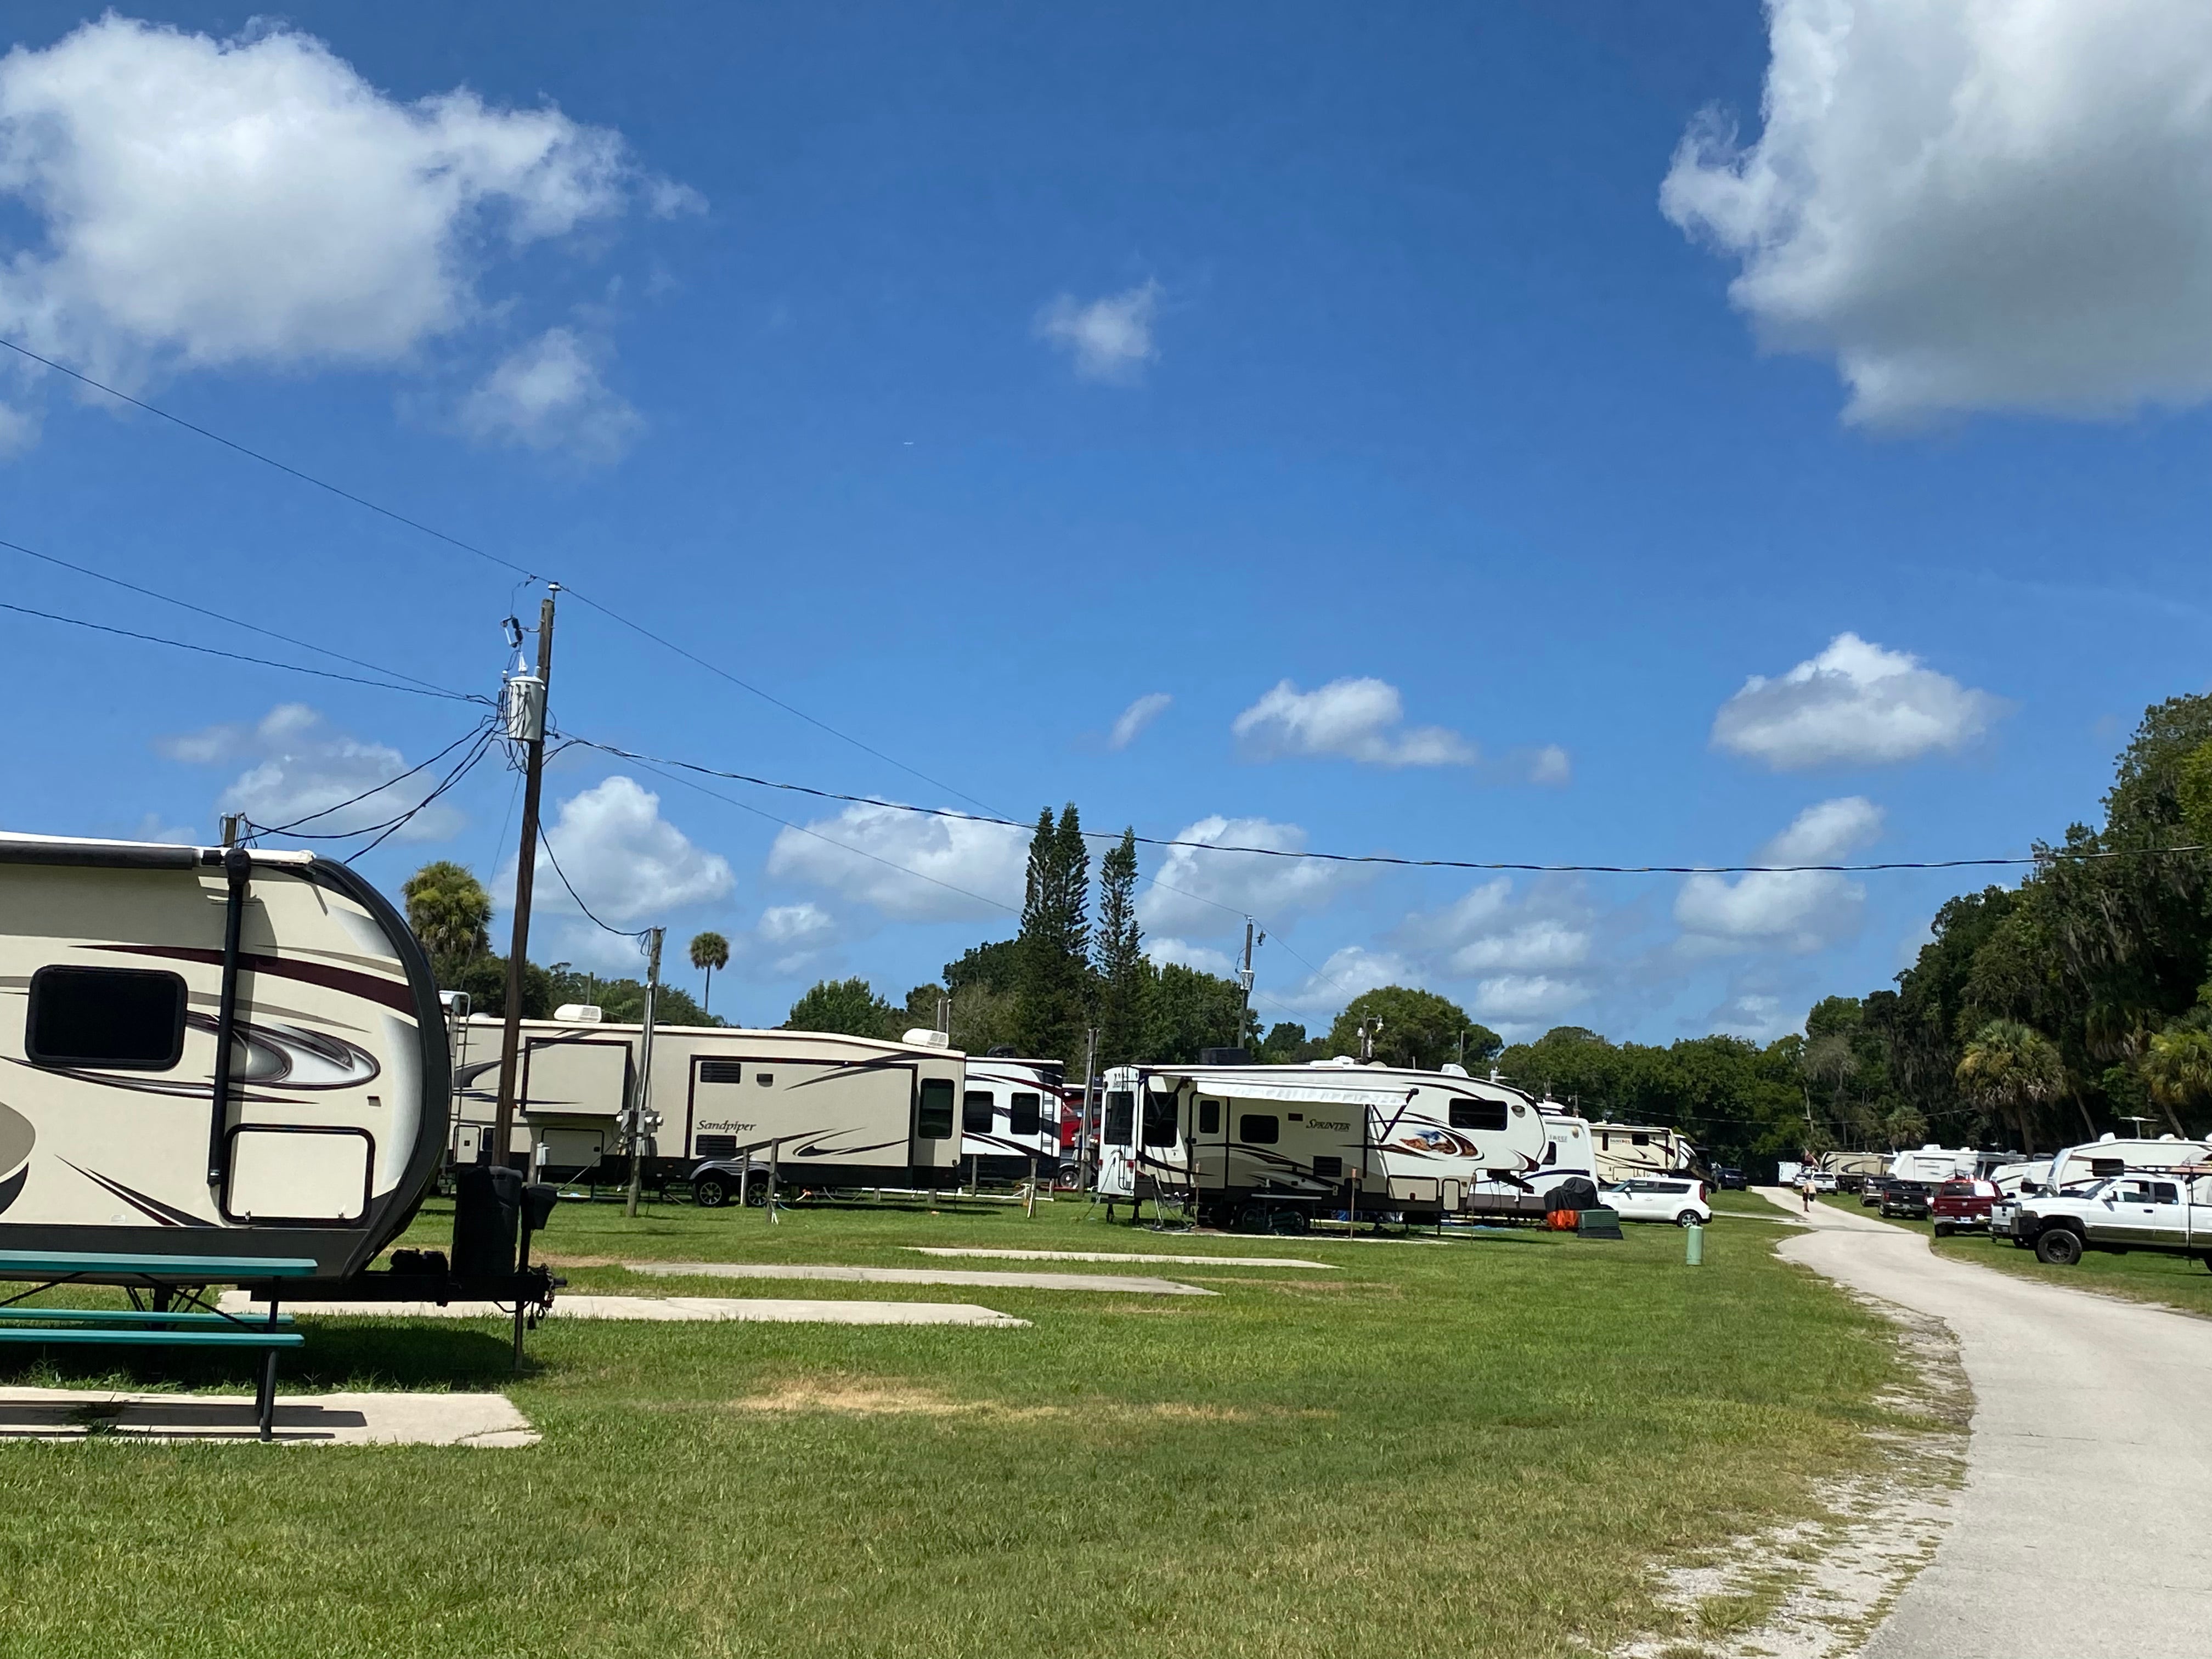 Camper submitted image from Daytona's Endless Summer Campground - 1